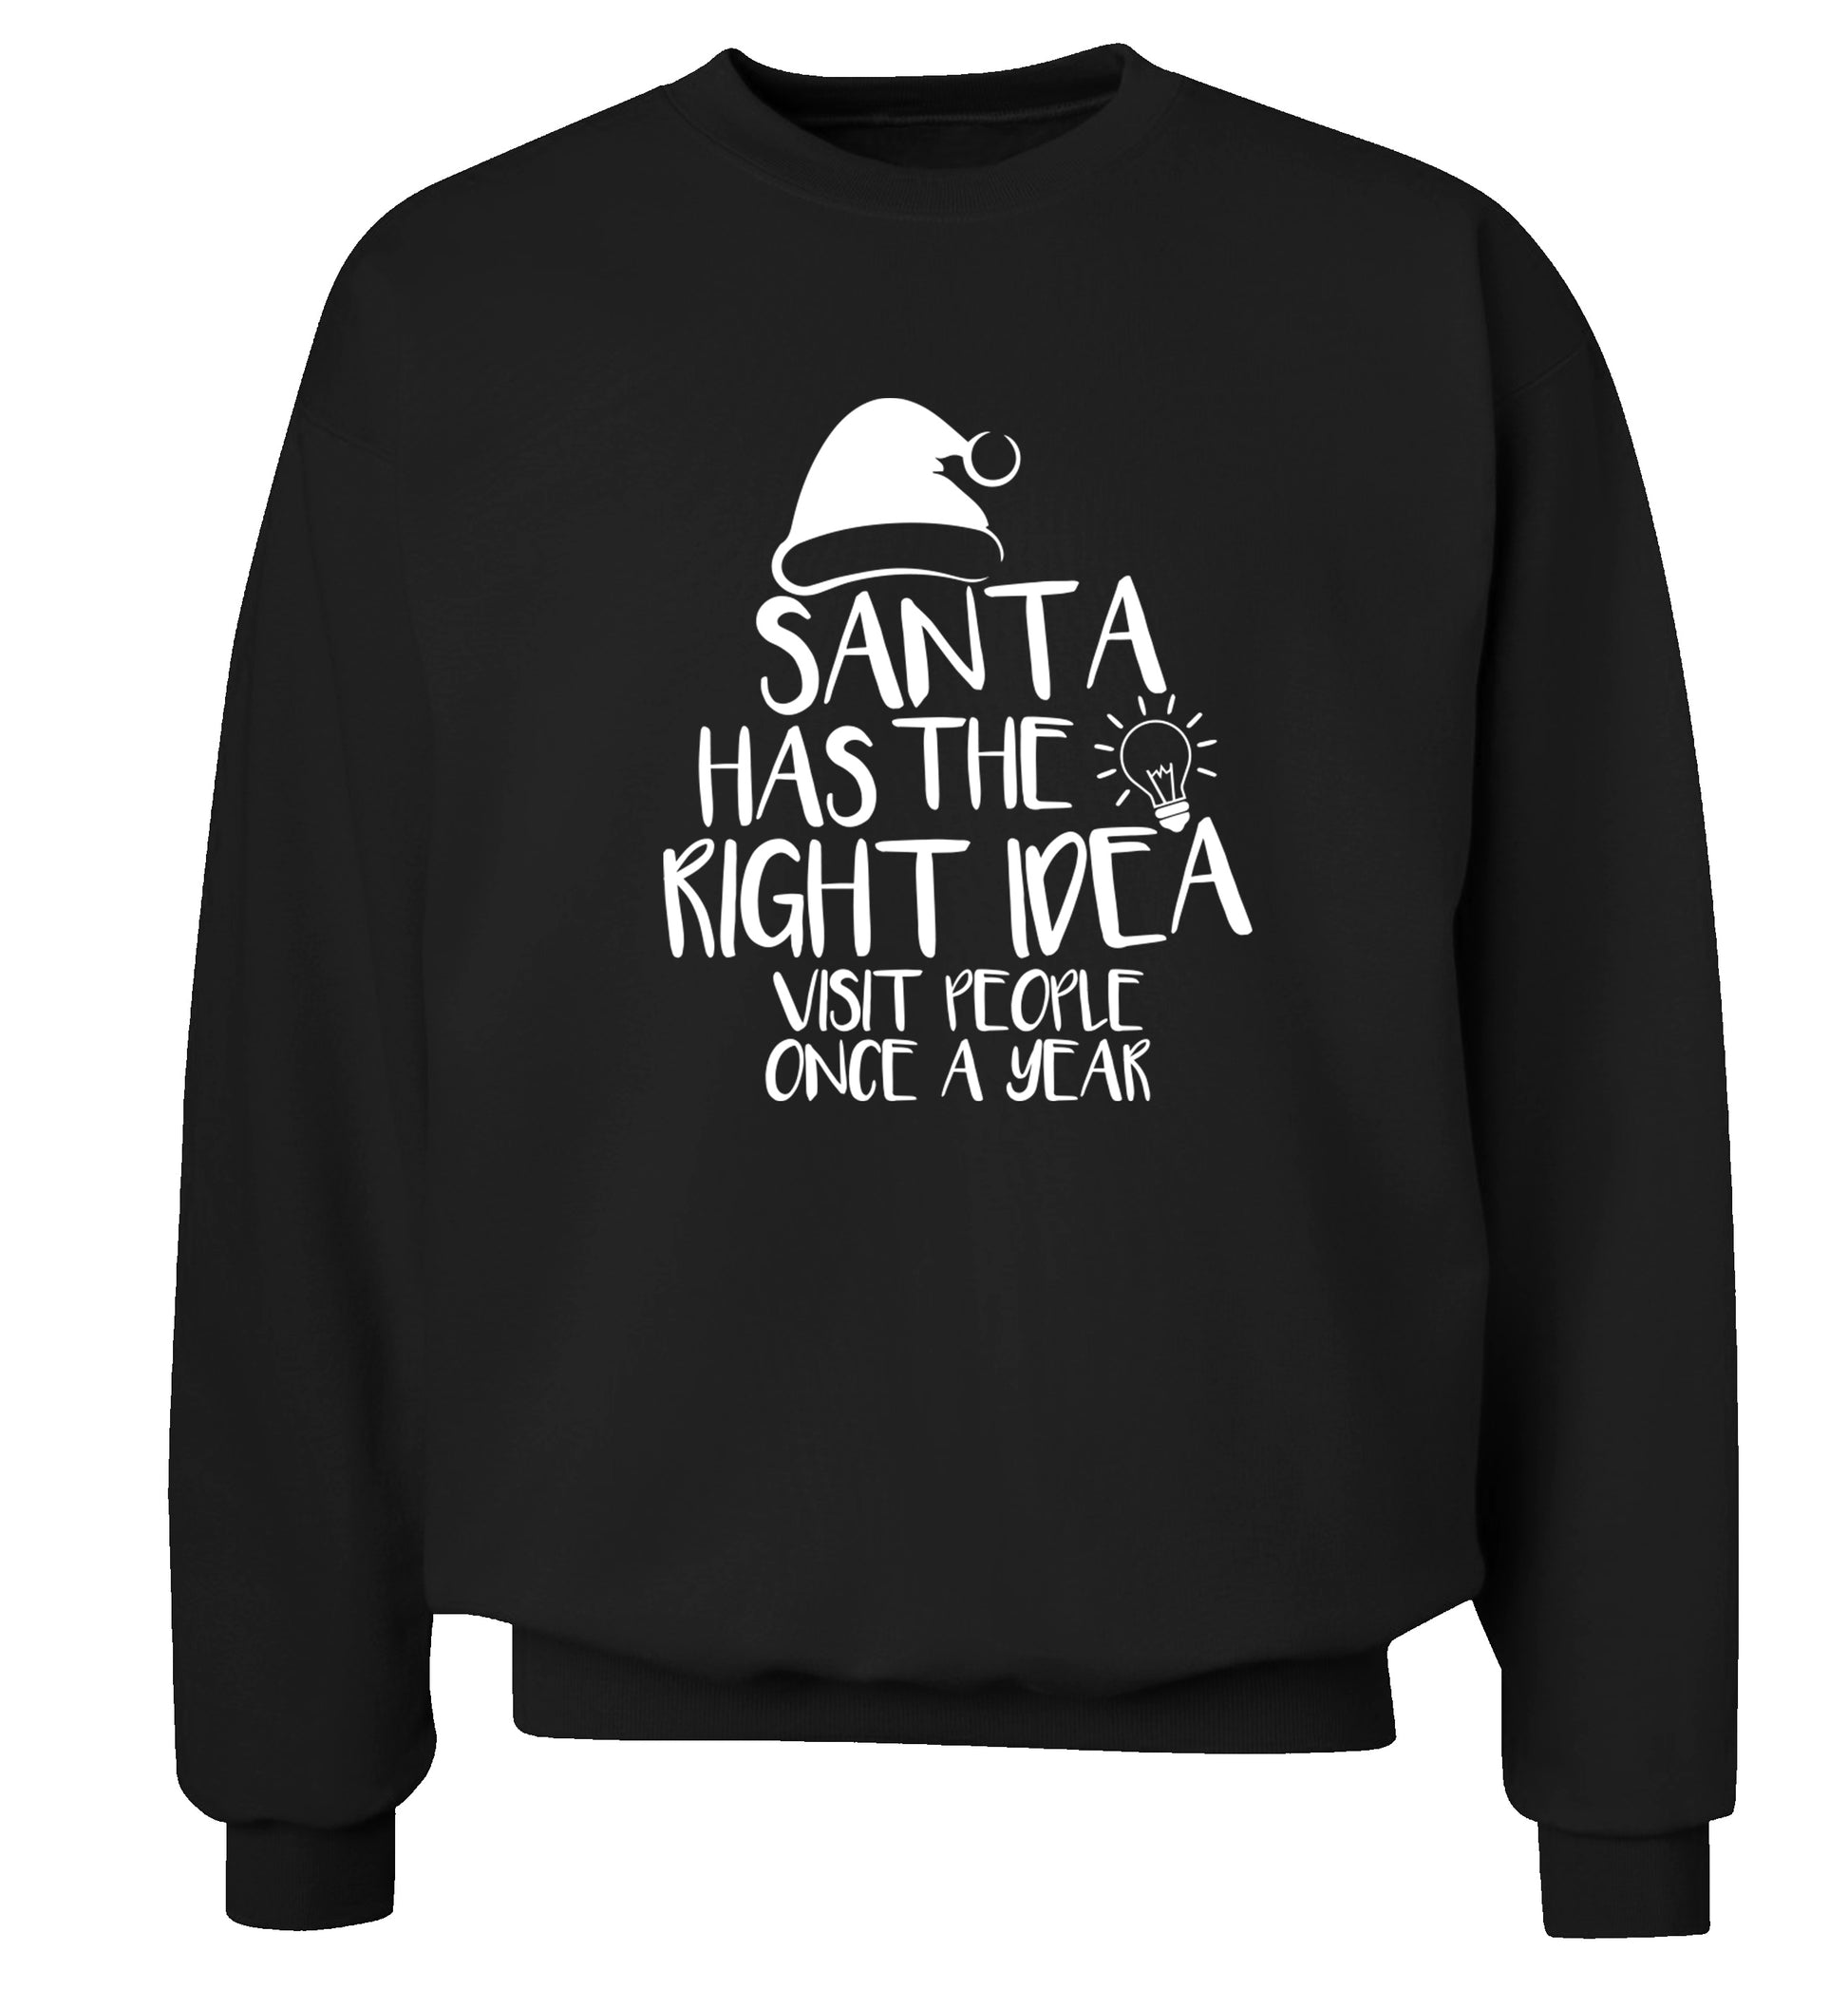 Santa has the right idea visit people once a year Adult's unisex black Sweater 2XL